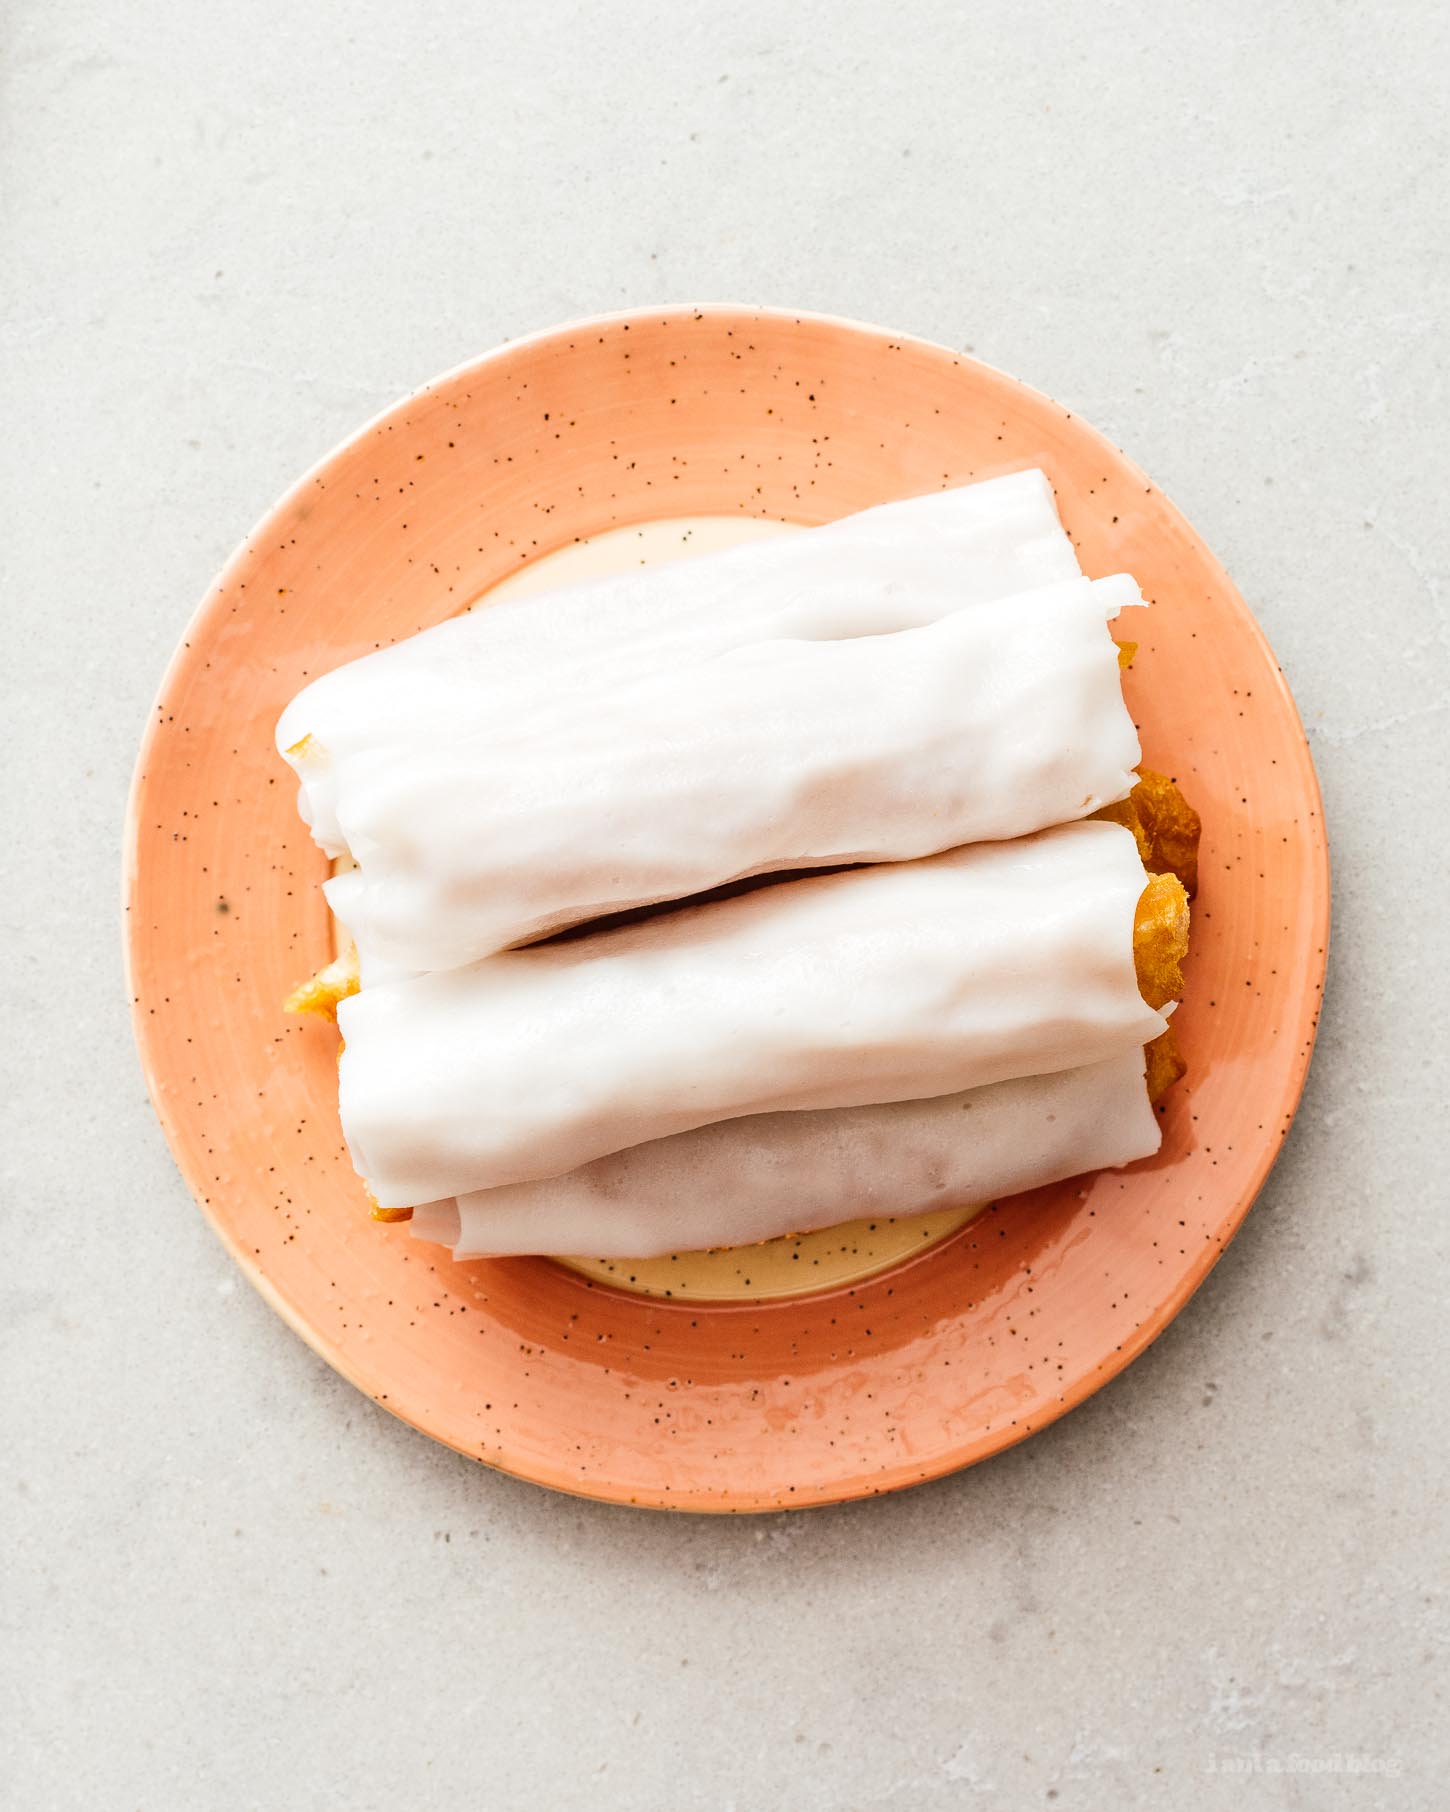 Zhaliang is super popular dish at Cantonese style dim sum made cheung fun (rice noodle sheets) wrapped around crispy youtiao (Chinese fried dough). It’s insanely tasty and easier than you think to make at home! #chinesefood #recipe #dimsum #zhaliang